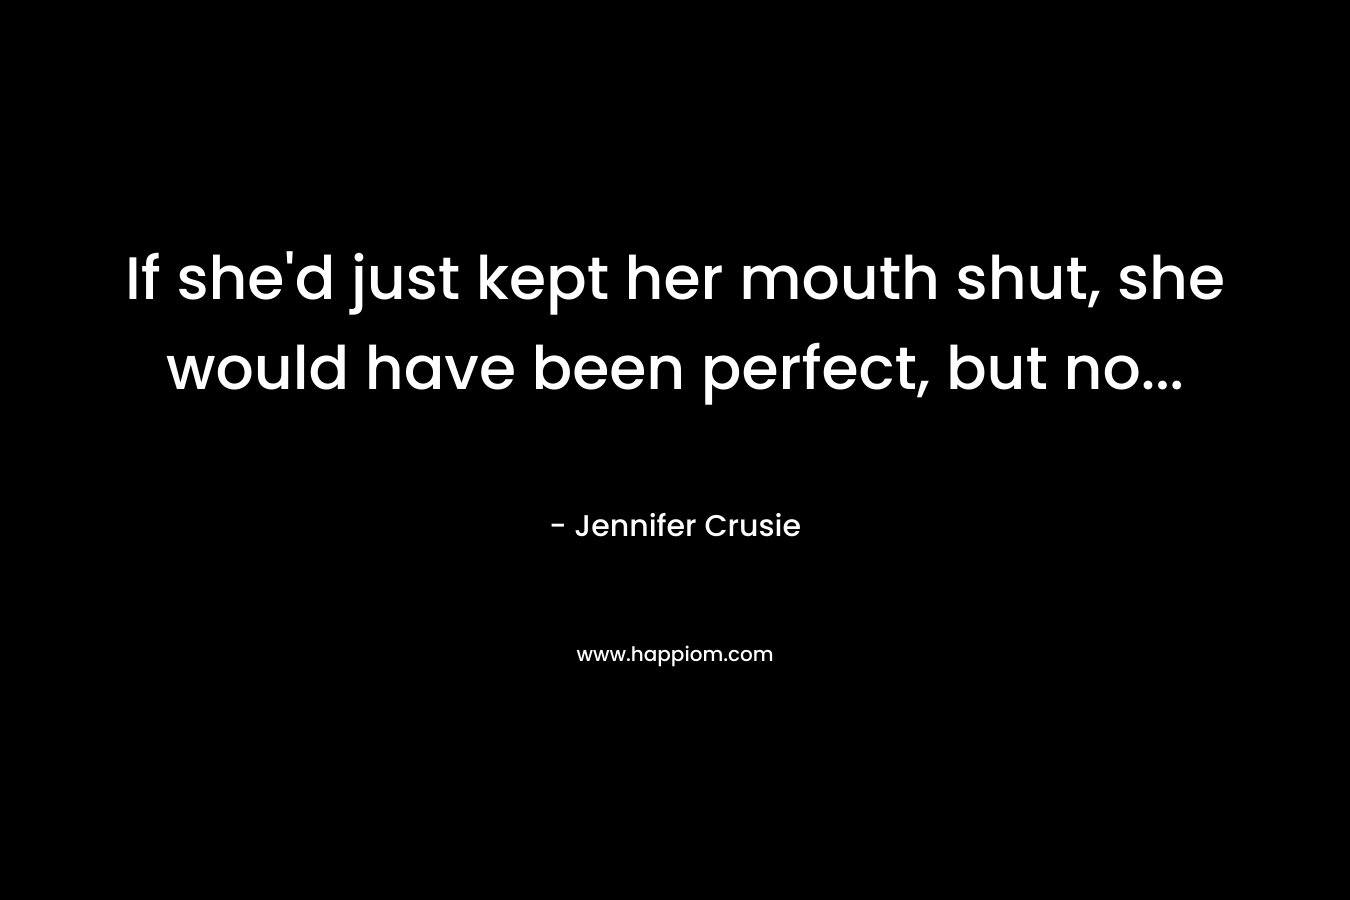 If she'd just kept her mouth shut, she would have been perfect, but no...